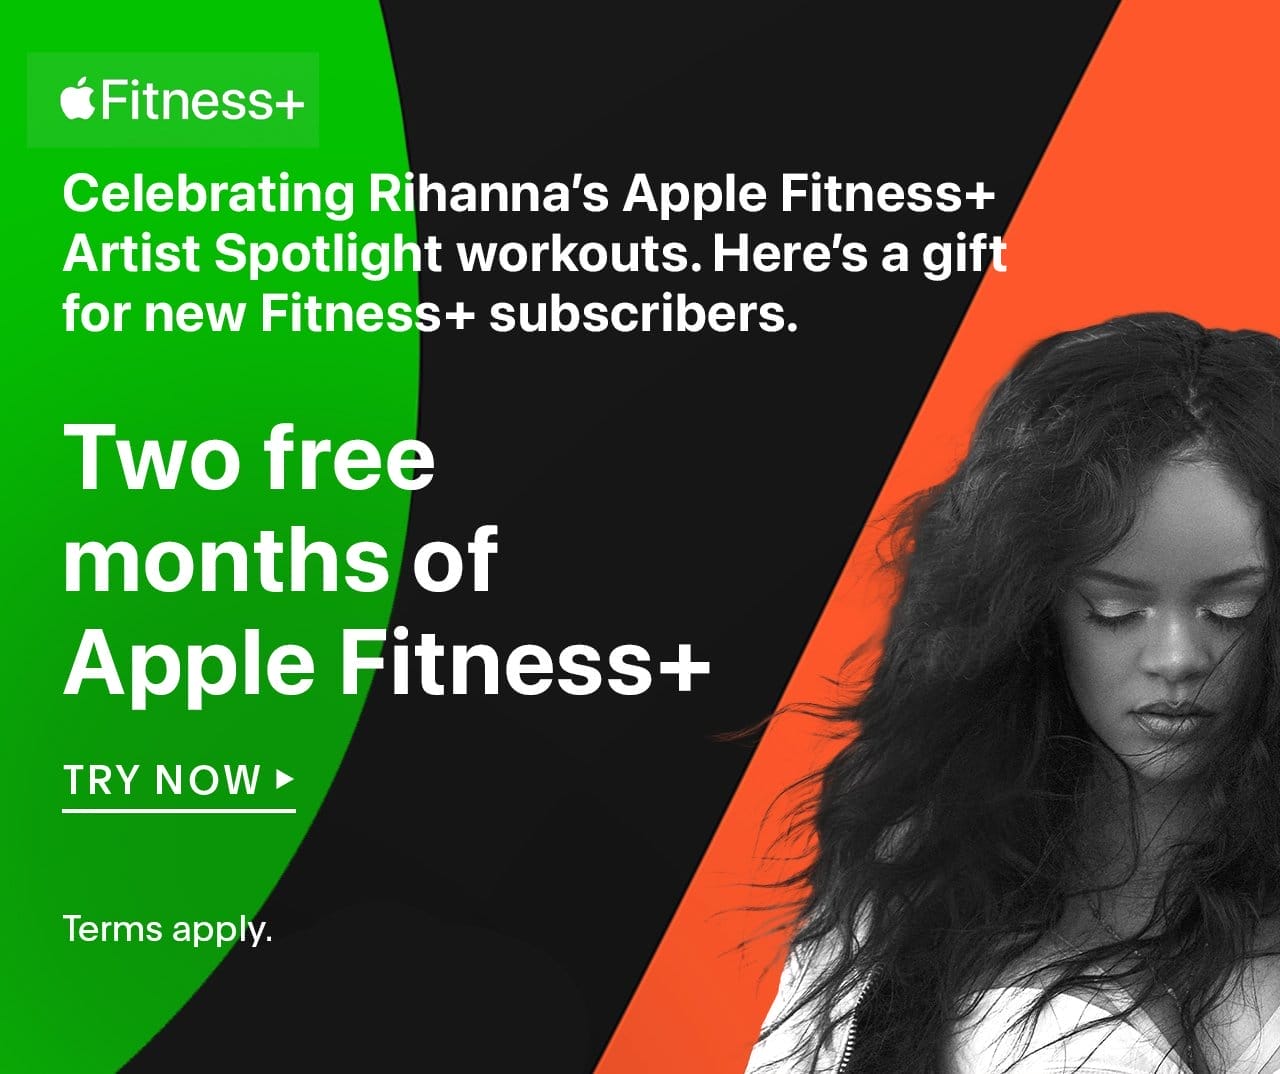 Celebrating Rihanna’s Apple Fitness+ Artist Spotlight workouts. Here’s a gift for new Fitness+ subscribers. Two free months of Apple Fitness+